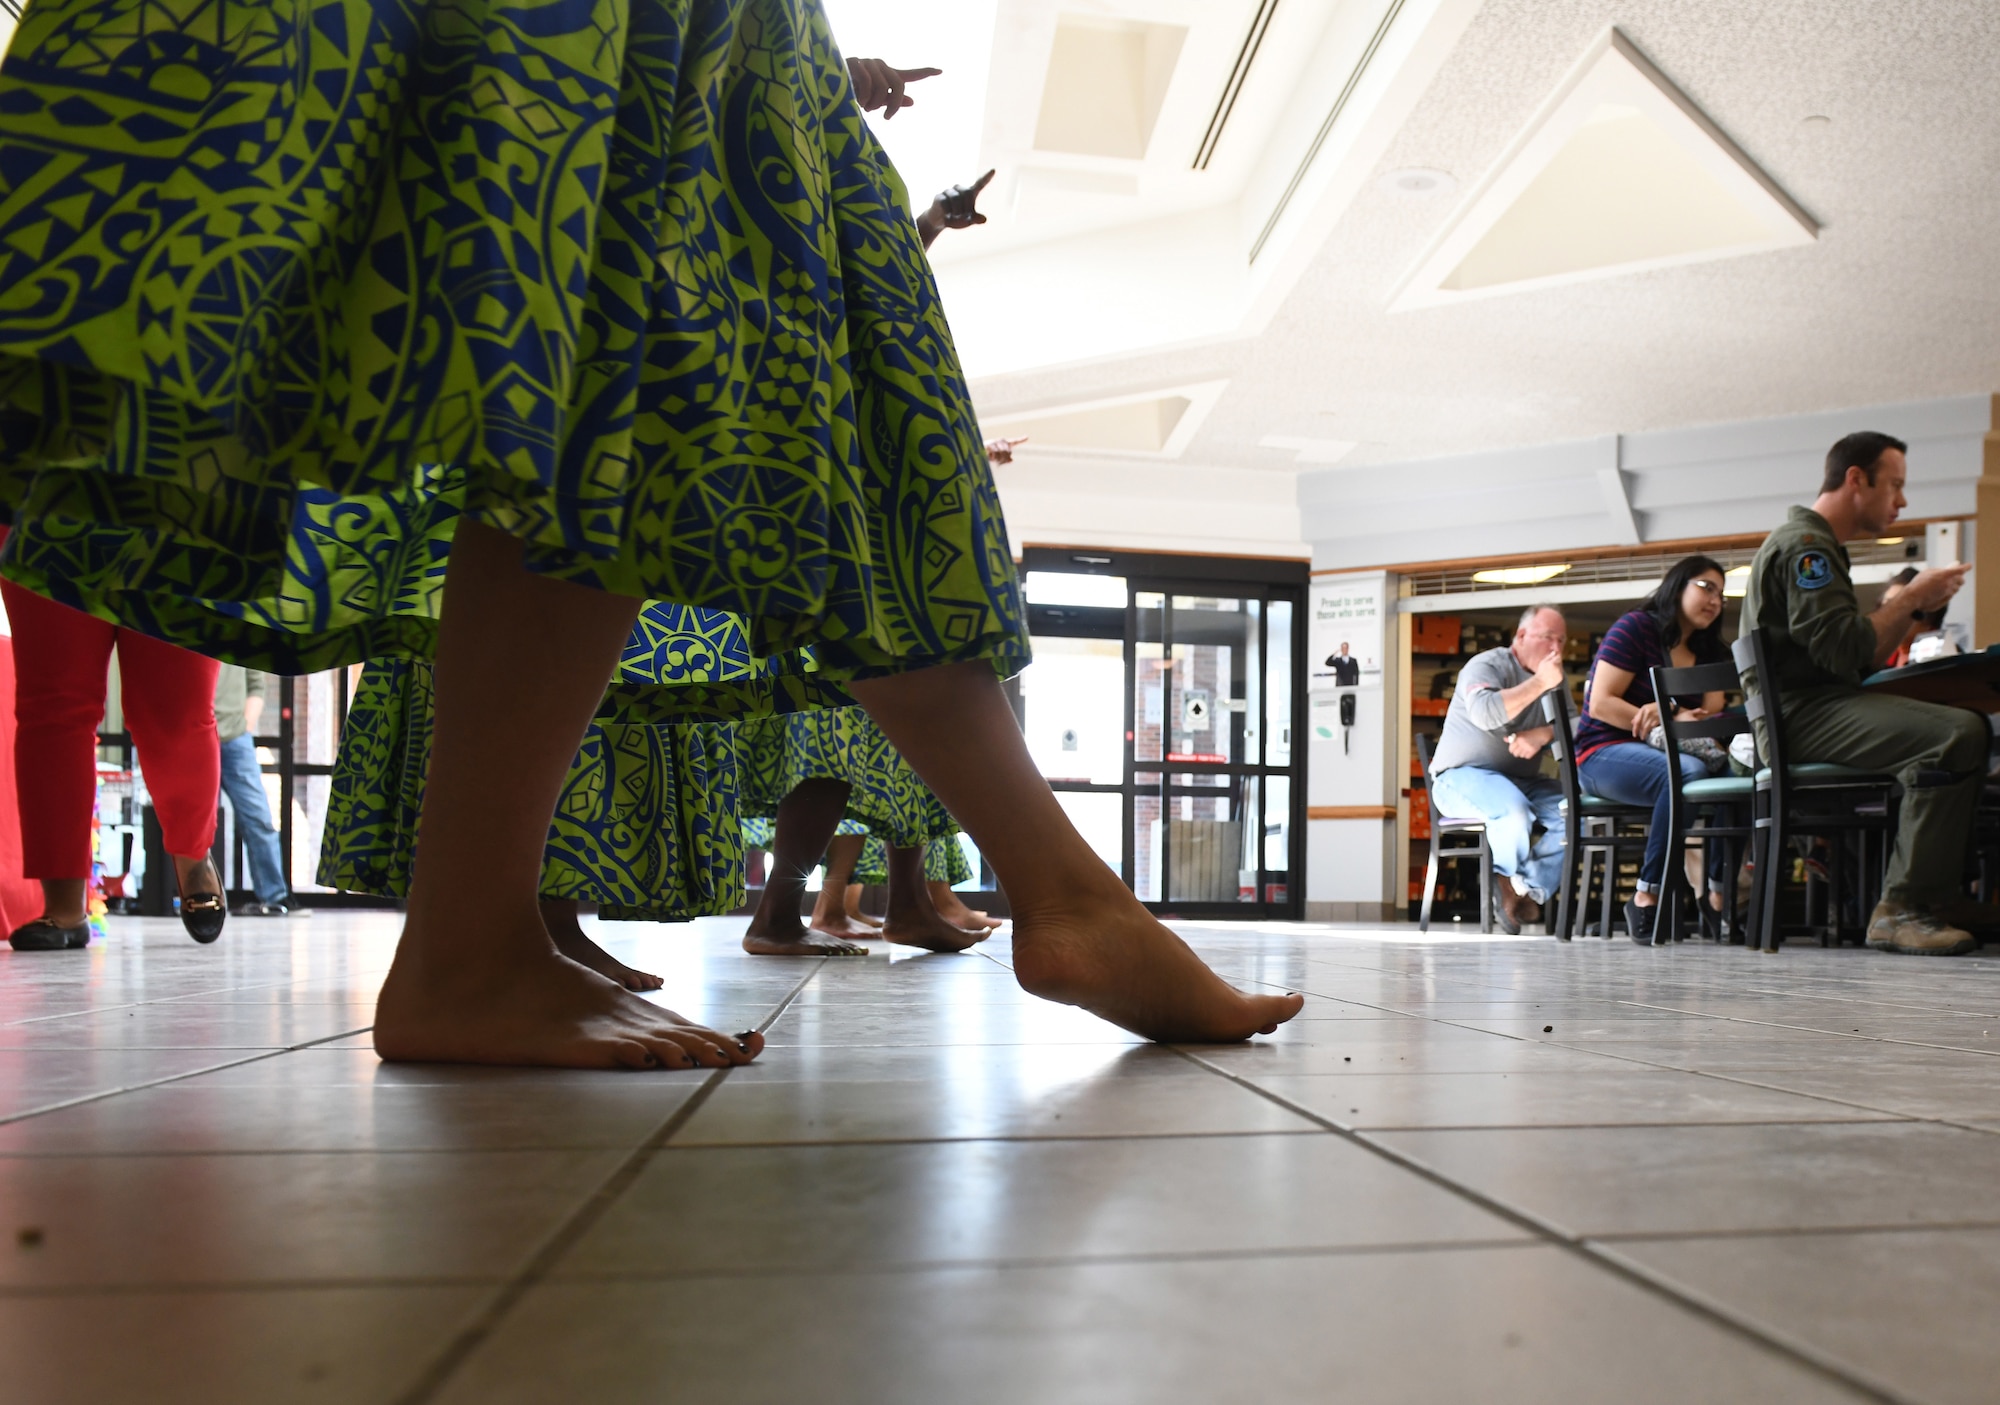 The Ellsworth Polynesian Dance group performs a hula dance during a cultural event at The Exchange on Ellsworth Air Force Base, S.D., May 3, 2019. The Asian Pacific American Heritage Month celebration helps bring the community together, teaches people about the unique culture of Asians and Pacific Islanders, and it highlights the many ways they have made the U.S. a better place. (U.S. Air Force photo by Senior Airman Thomas Karol)